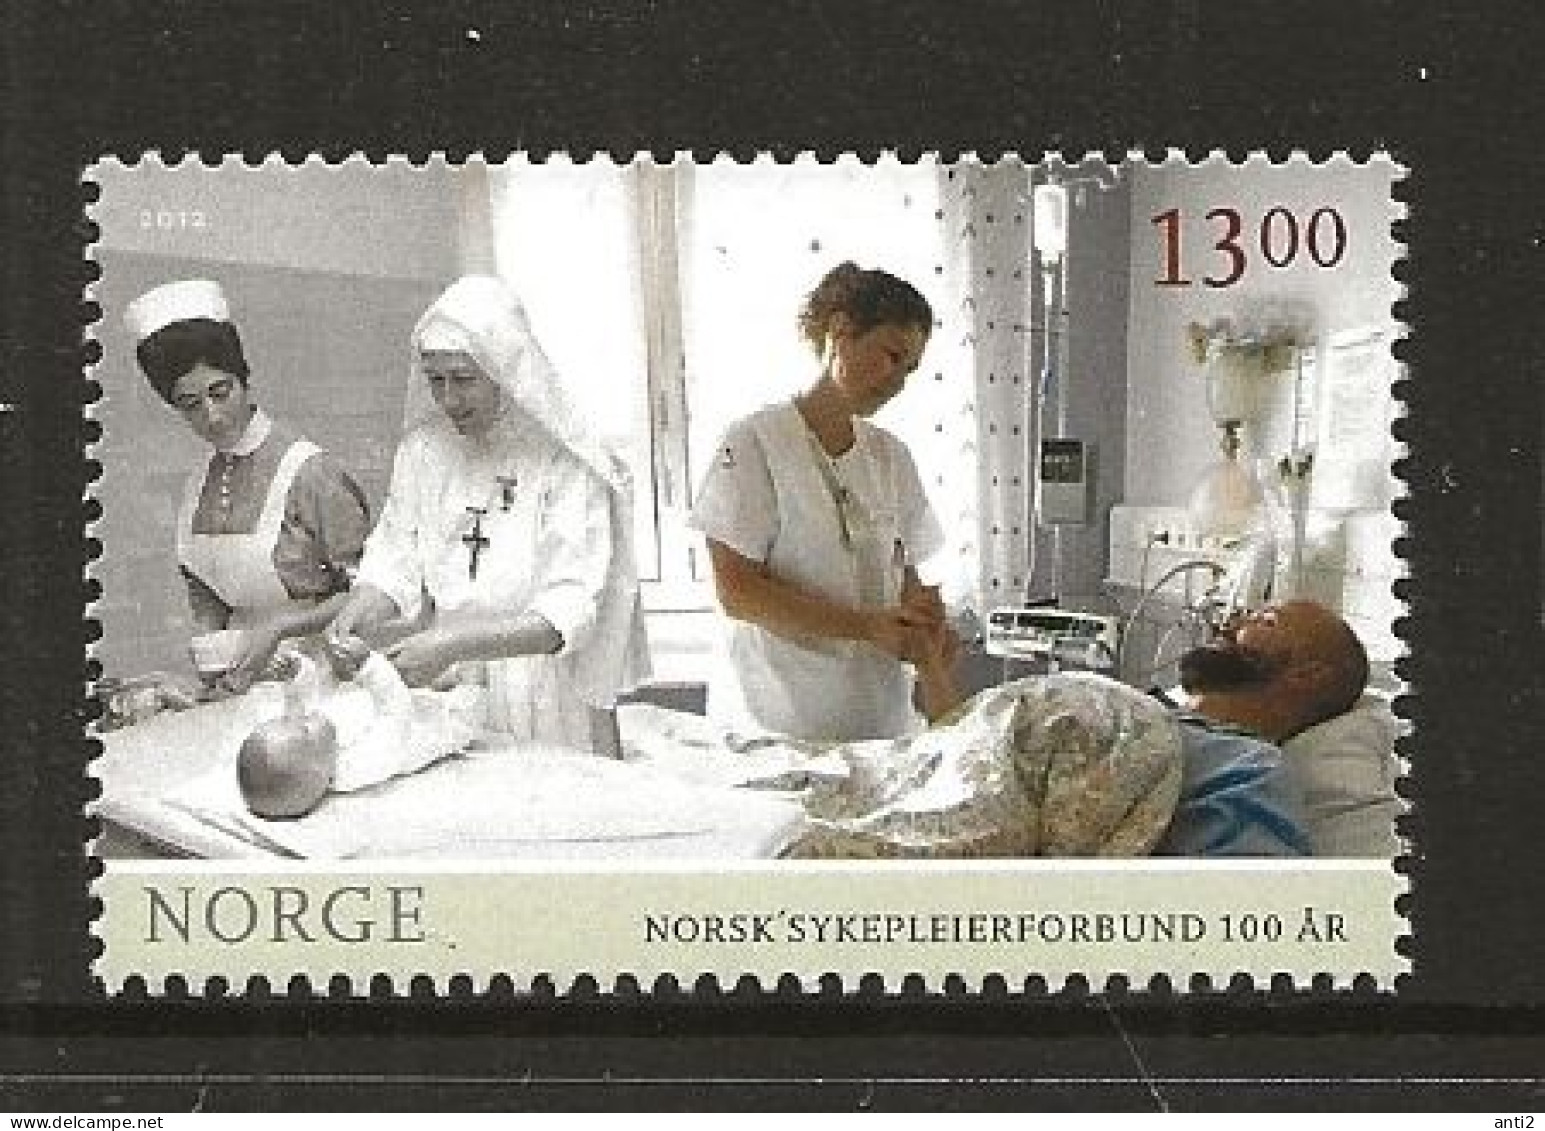 Norway Norge 2012 Centenary Of The Professional Association For Nursing Profession, Mi 1795  MNH(**) - Ungebraucht